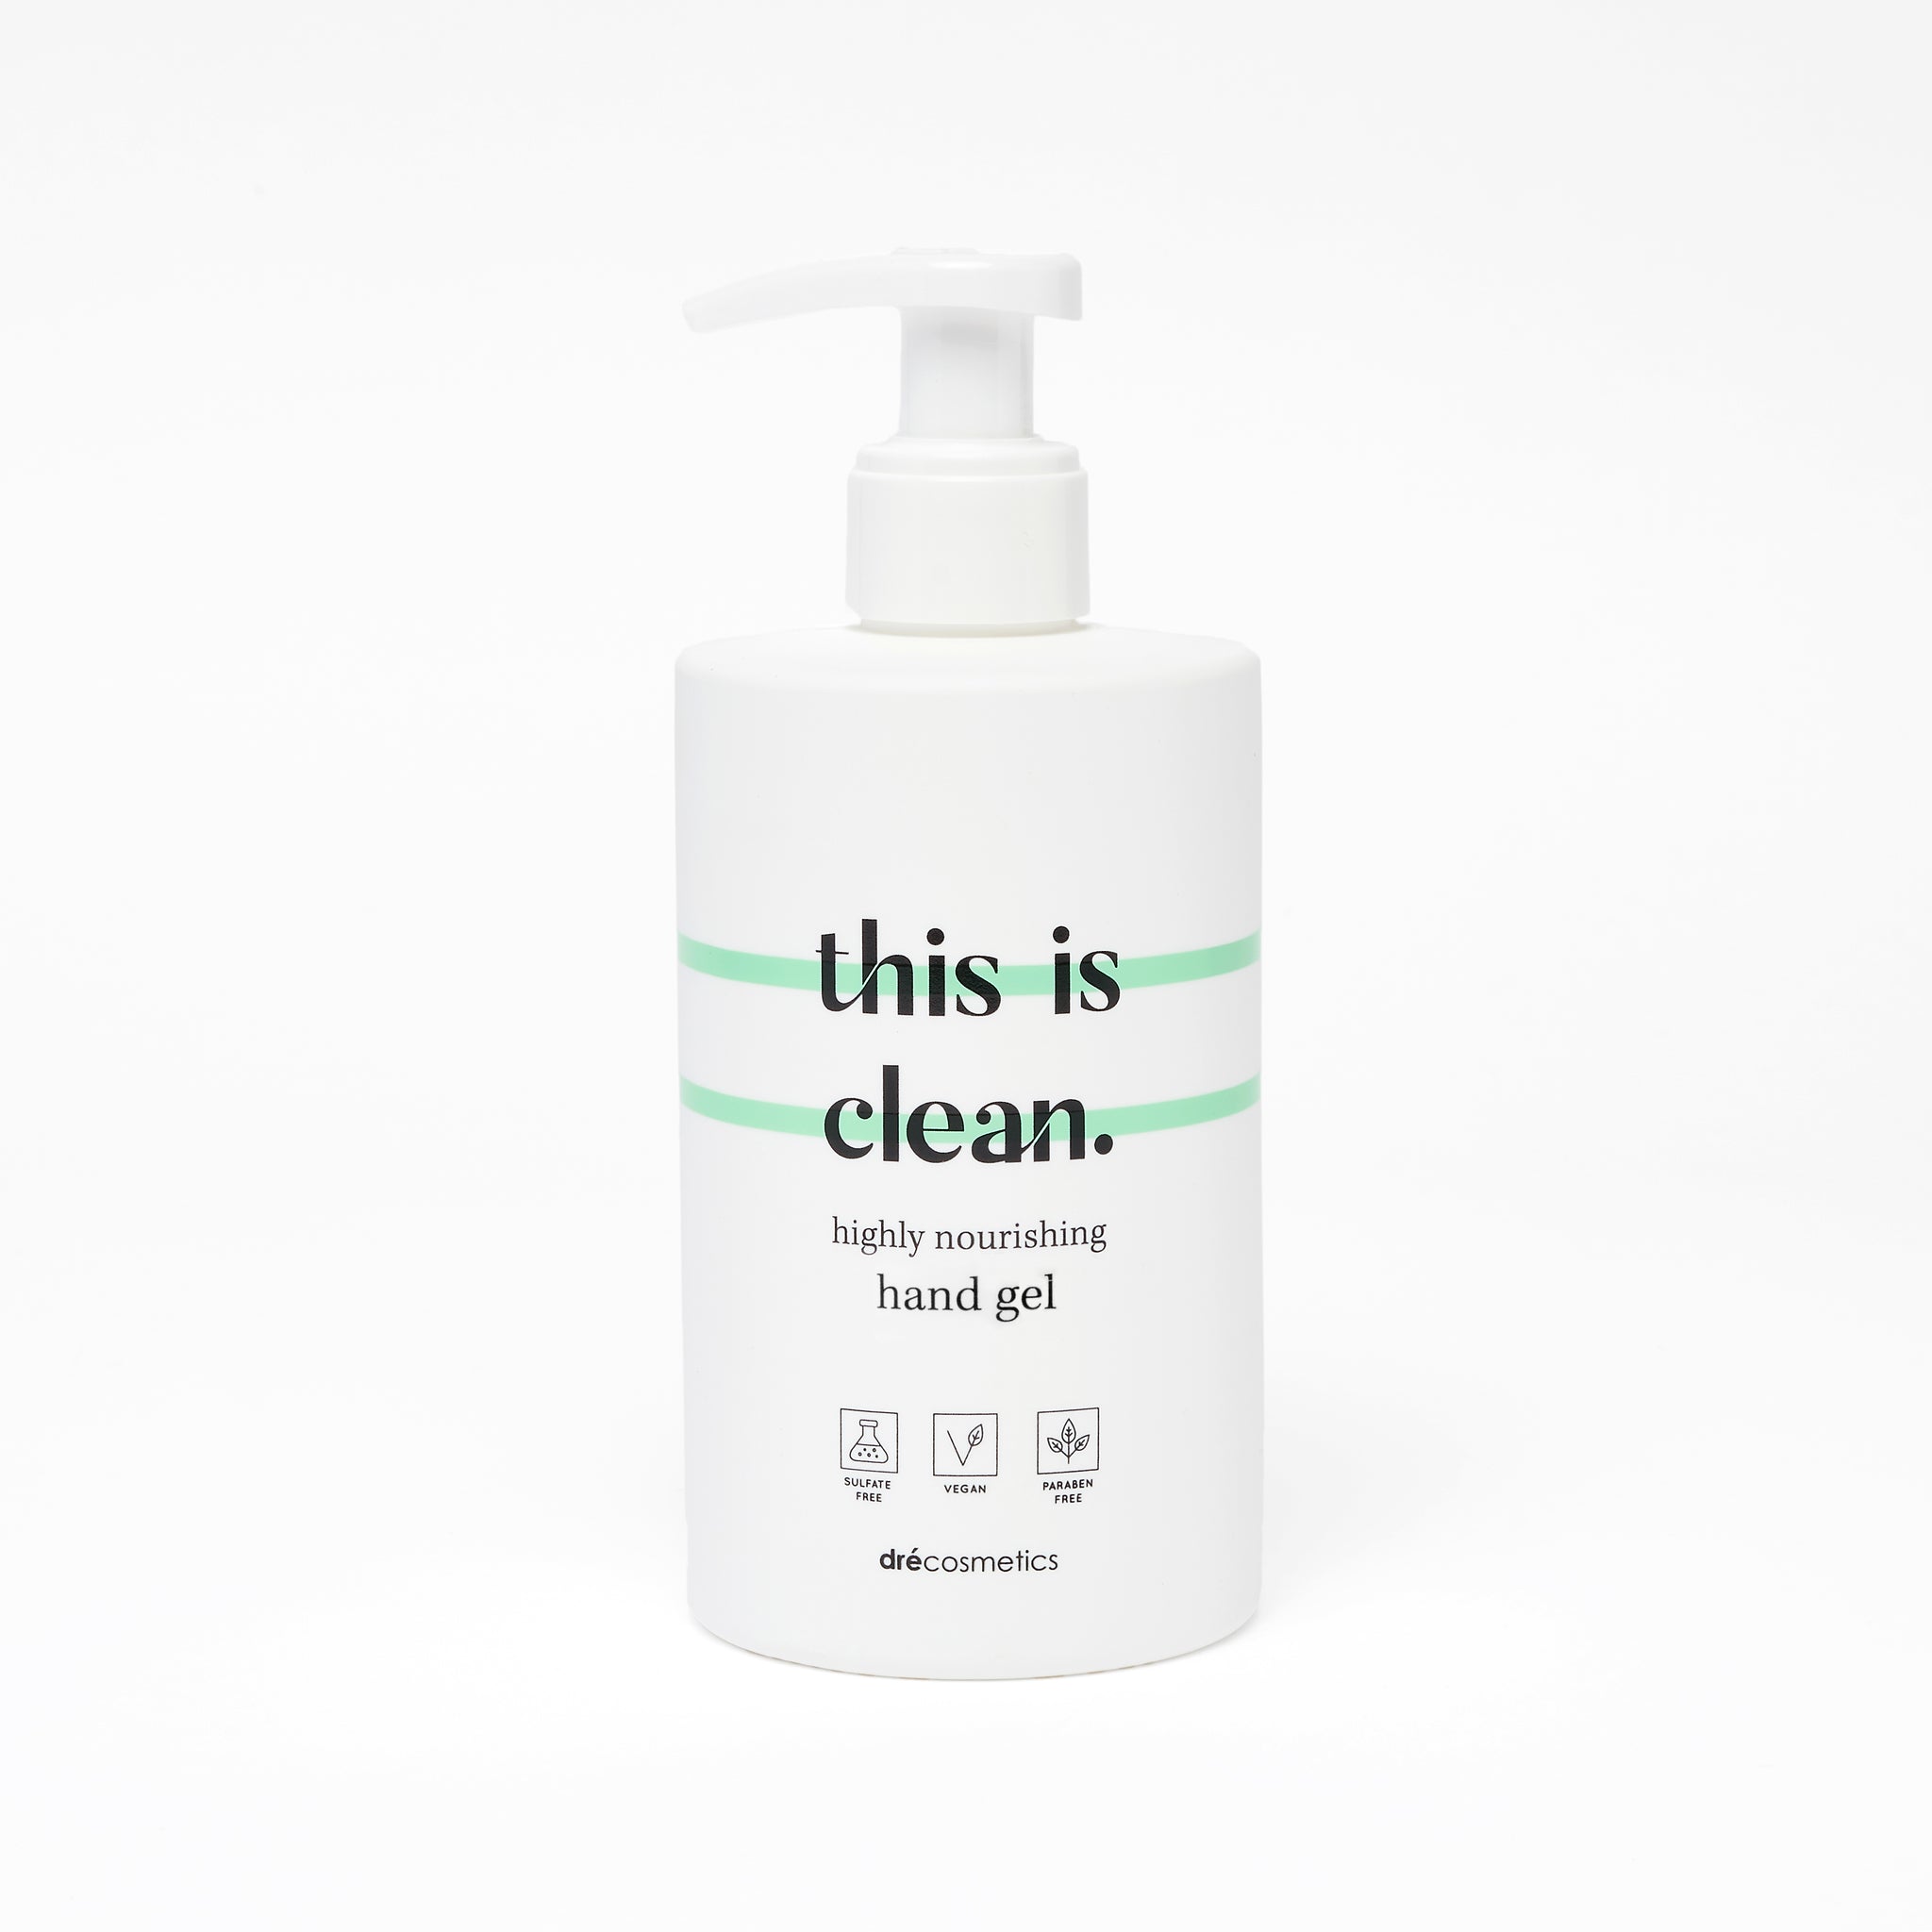 Hand Gel "this is clean." (6x300ml)